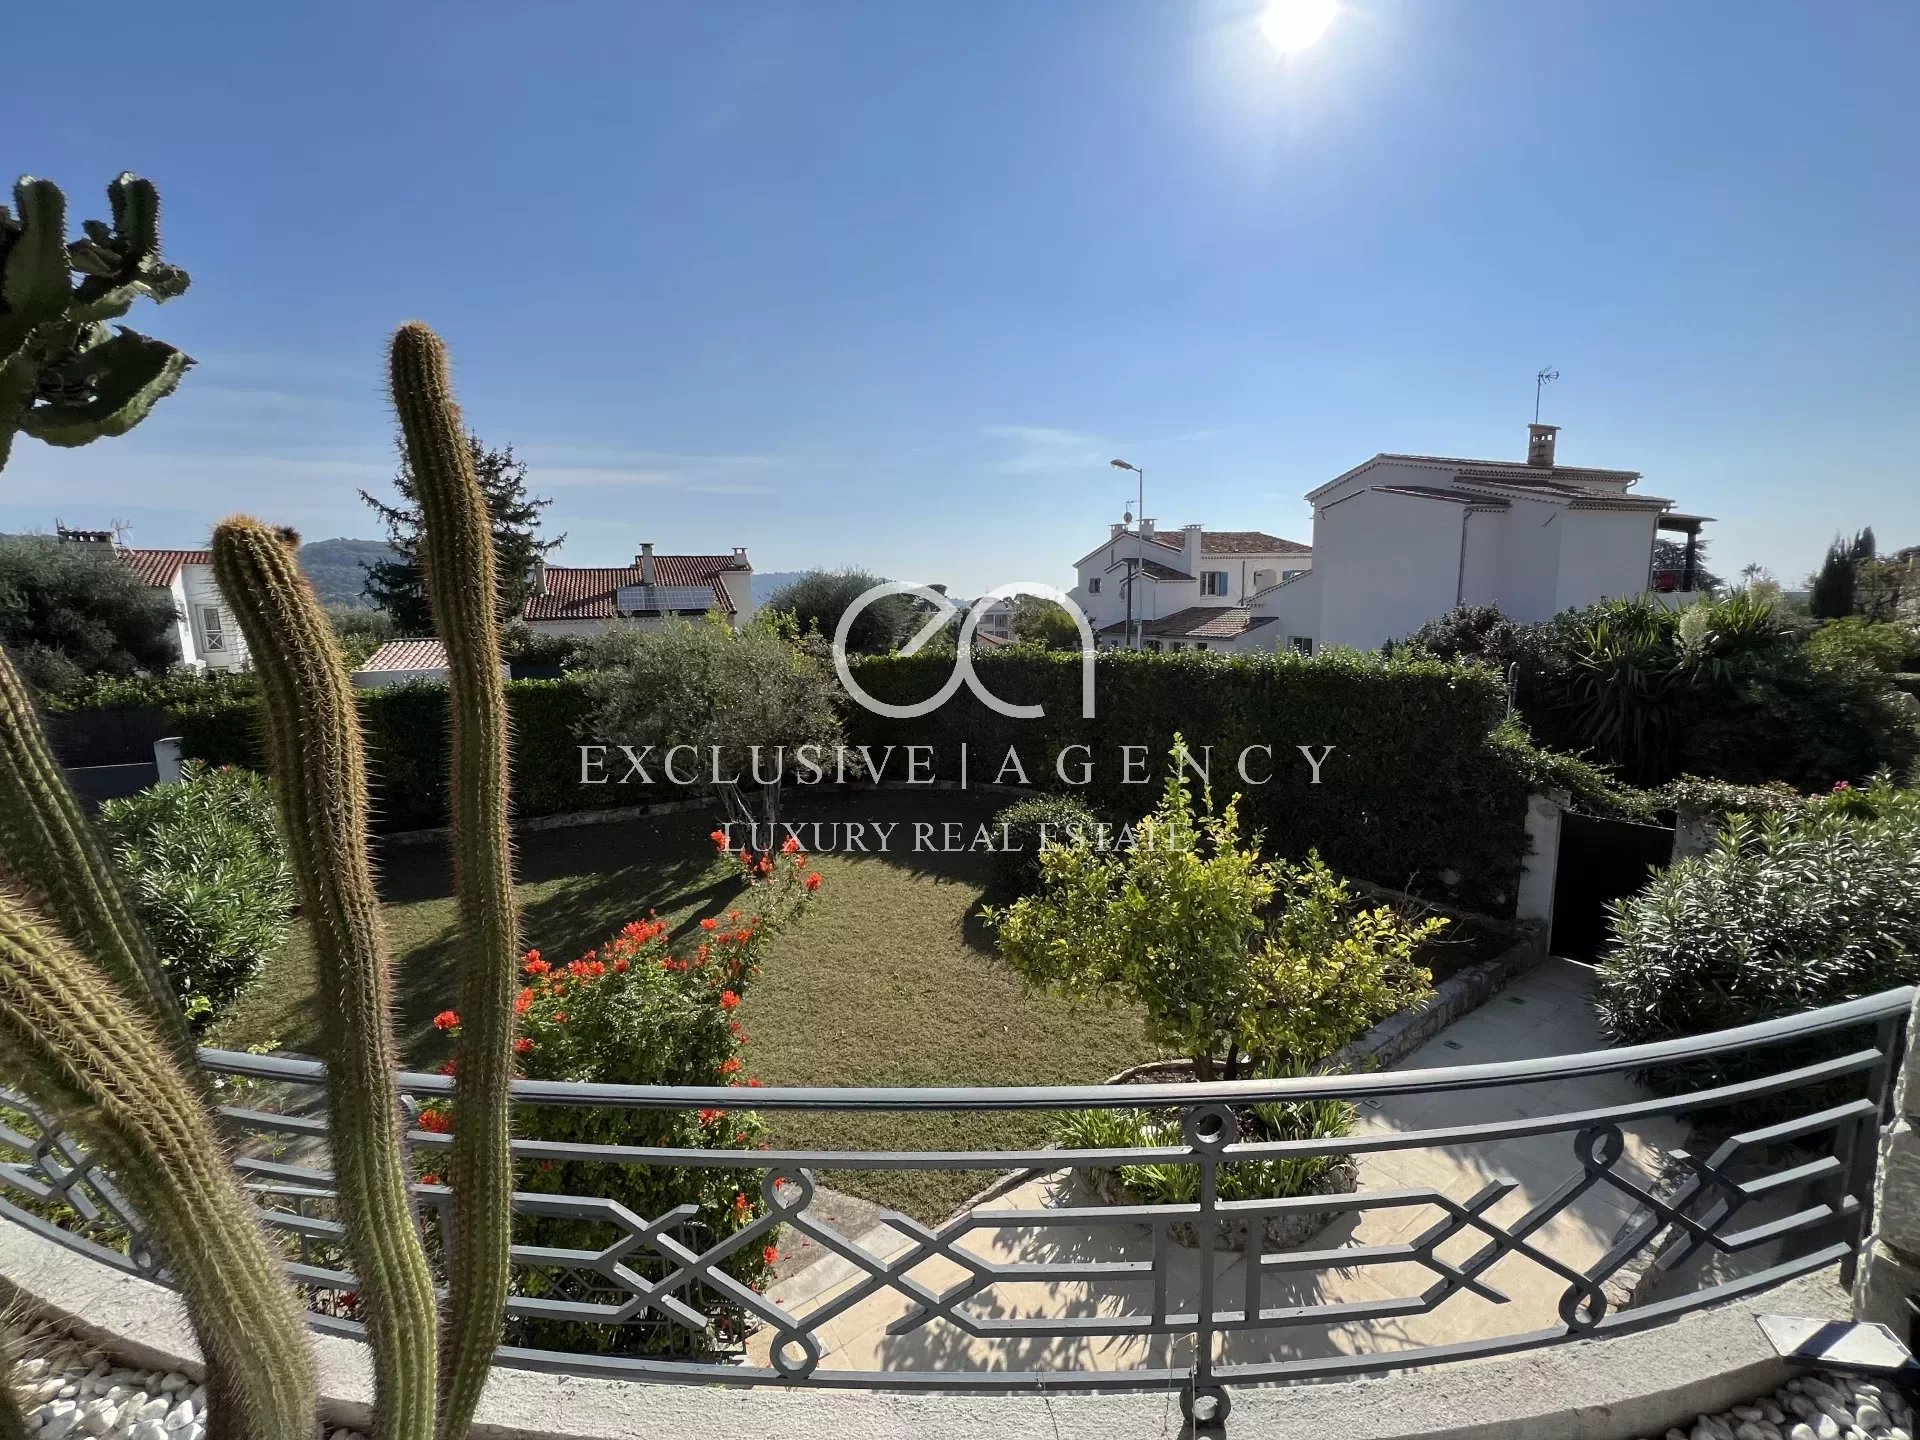 Le Cannet Europe, 220sqm villa with 5 bedrooms, garden, and pool.